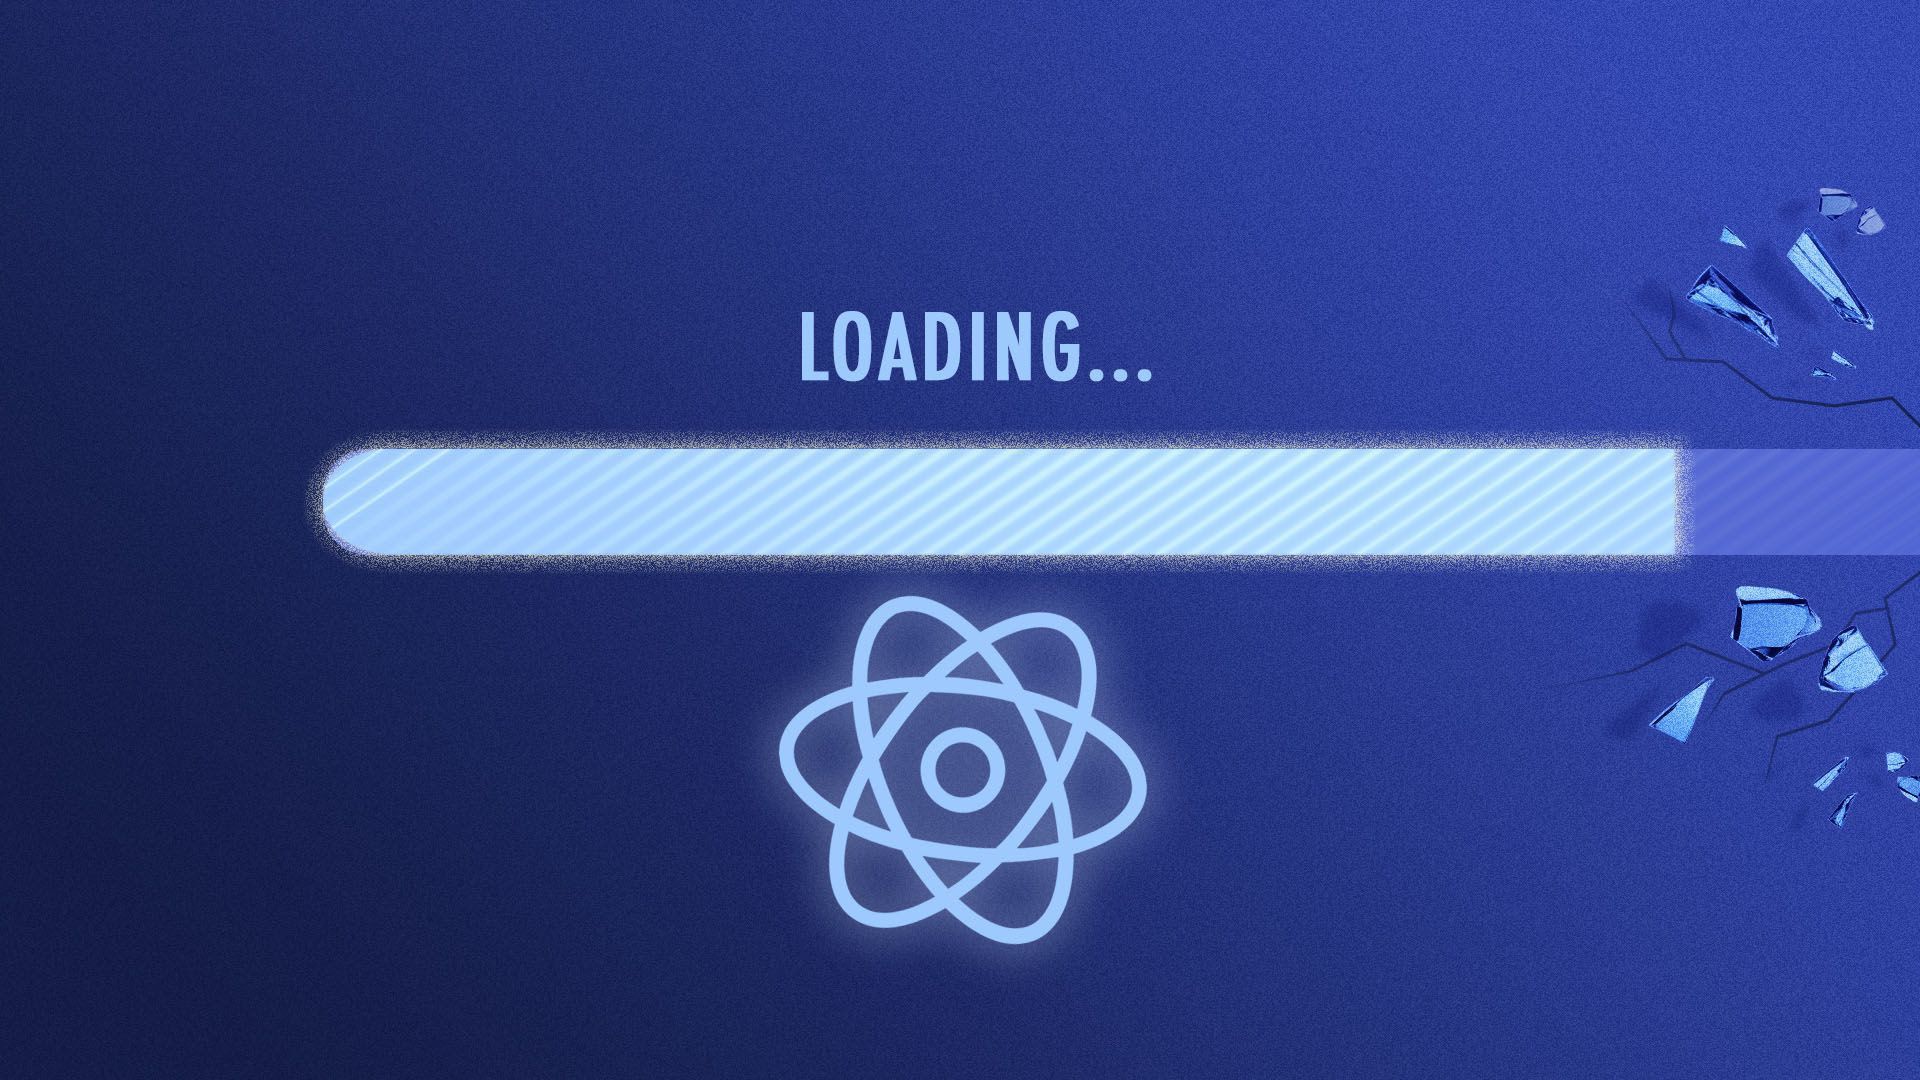 A "loading" bar on a computer screen